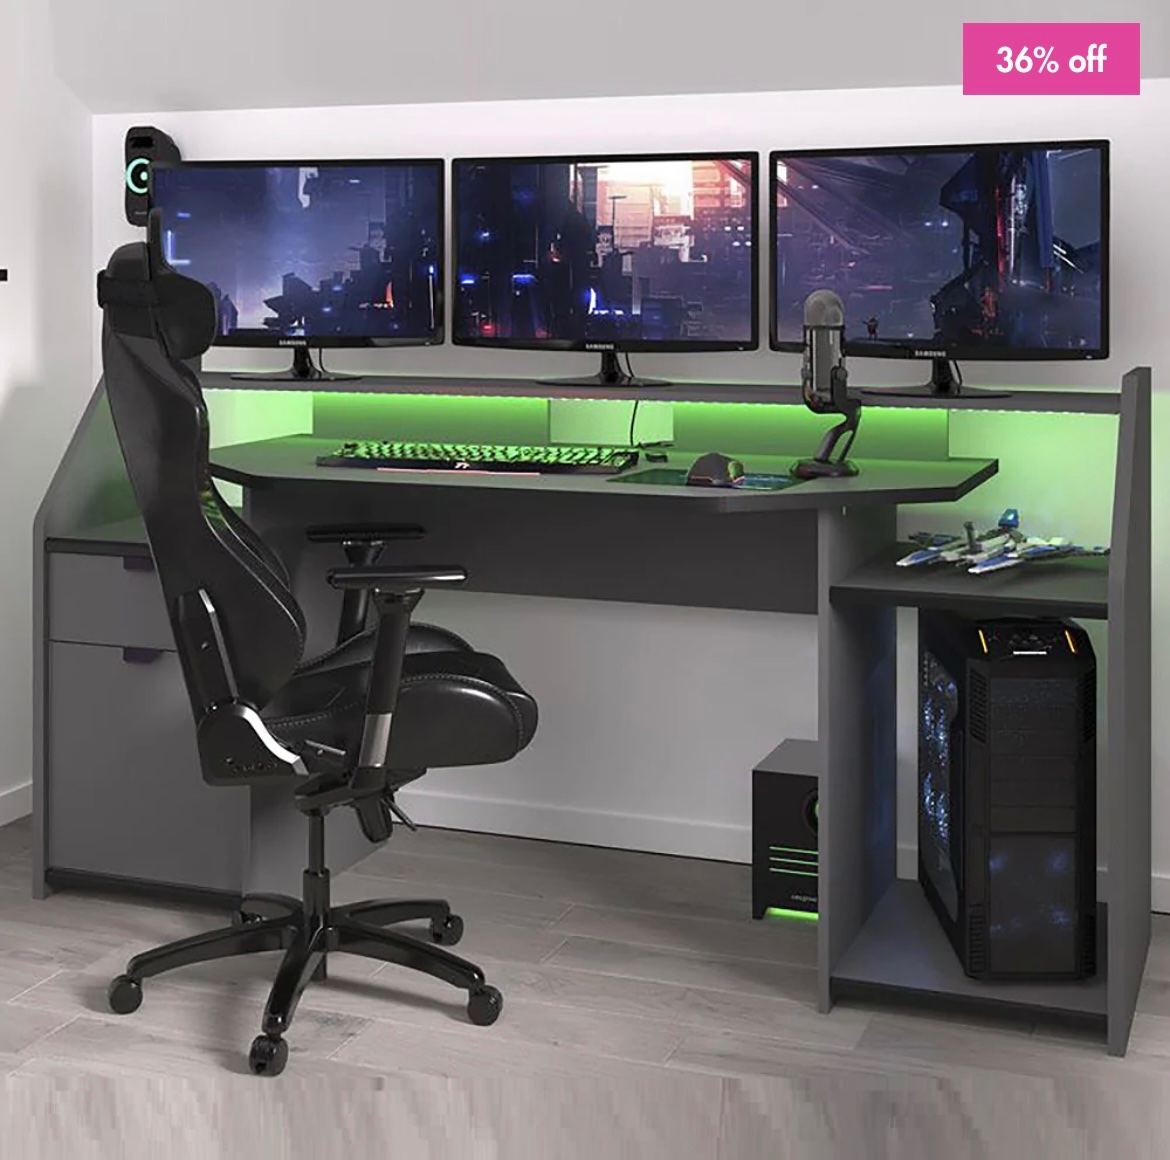 This Parisot SetUp gaming desk has everything any gamer could ever need🎮 From the storage space to the LED light features - it’s sure to become a statement piece in any gamers bedroom - And now for 36% off…⚡️

#parisot #gamer #gamingdesk #game #familywindow #LED #parisotsale